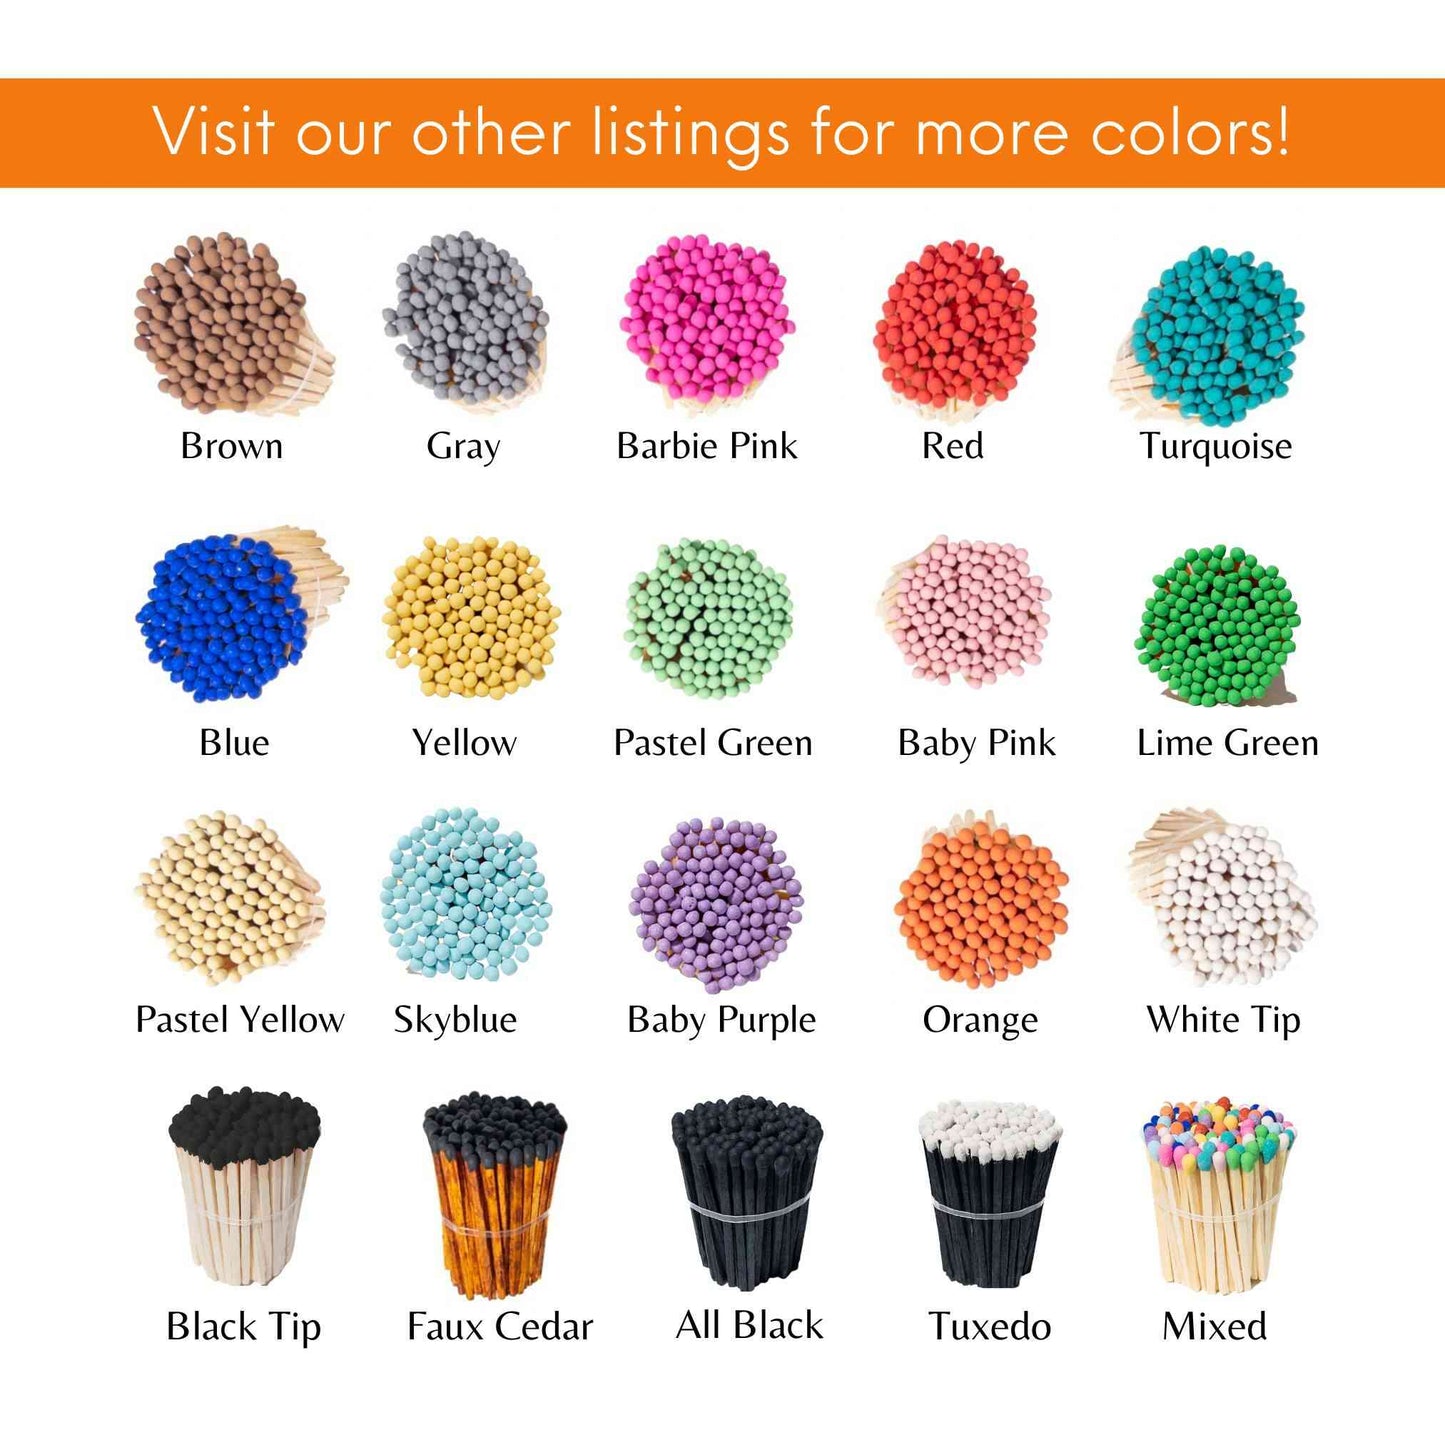 Visit our other listings for more colors! 20 colors available for 1.90” safety matches. 
Brown tip, Gray Tip, Hot pink, Red tip, Turquoise, Blue, Yellow, Pastel green, Baby pink, lime green, pastel yellow, sky blue, baby purple, orange, white tip regular wooden stem, black tip regular wooden stem, Faux cedar, Black Tip with black stem, tuxedo and mix.